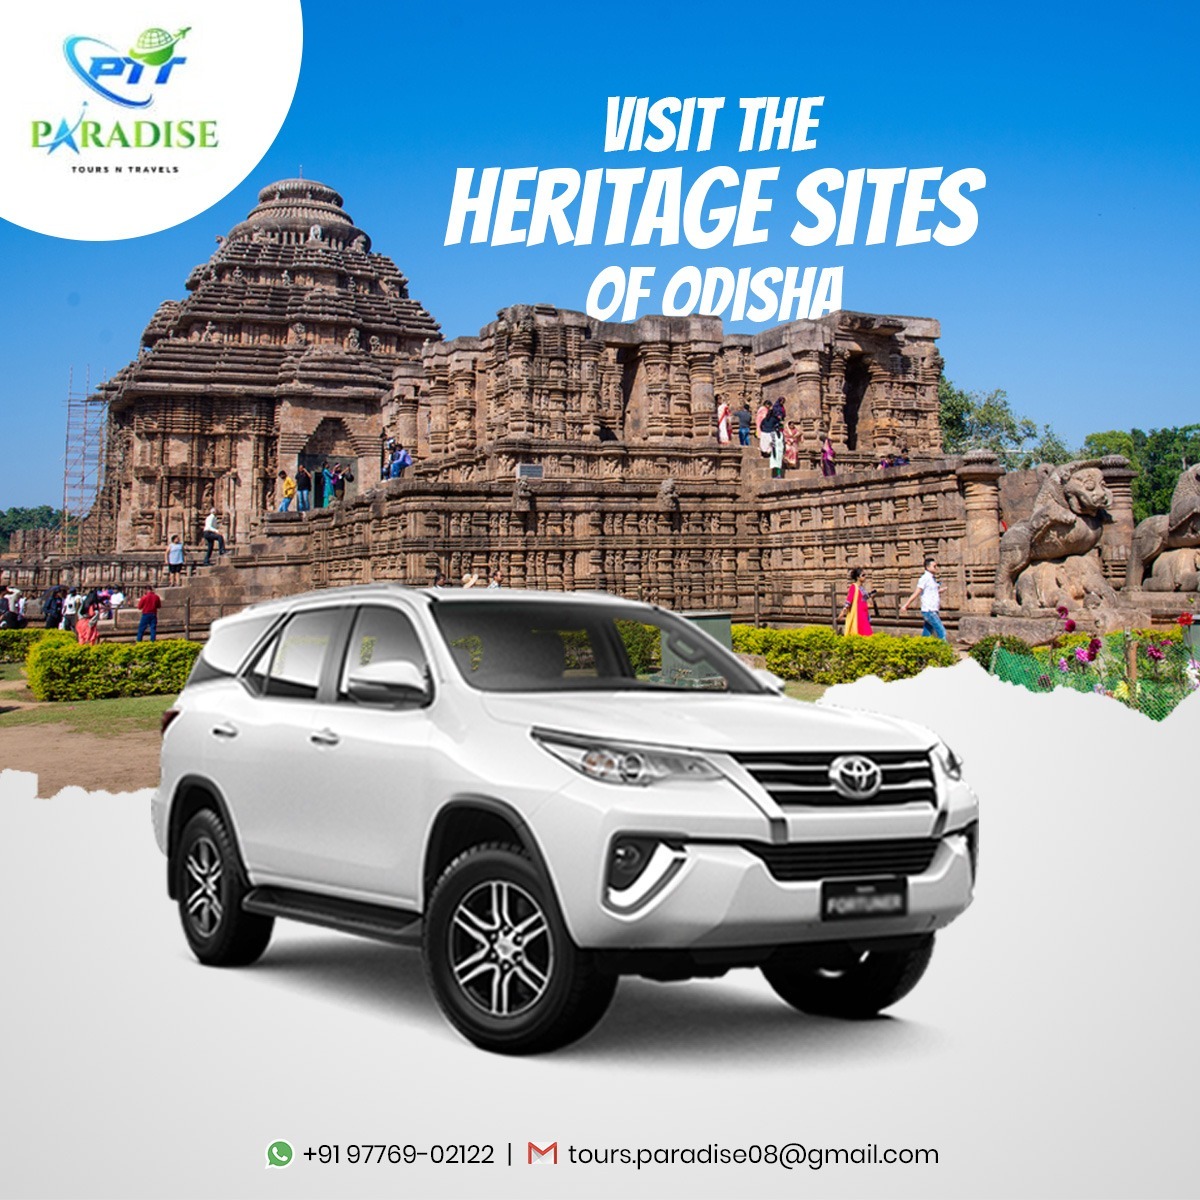 We have curated an unforgettable itinerary that showcases the best of Odisha's heritage, ensuring every moment is filled with wonder and discovery.
𝐂𝐚𝐥𝐥: 097769 02122
#OdishaHeritage #ExploreOdisha #HeritageTourism #DiscoverOdisha #CulturalHeritage #HeritageTravel